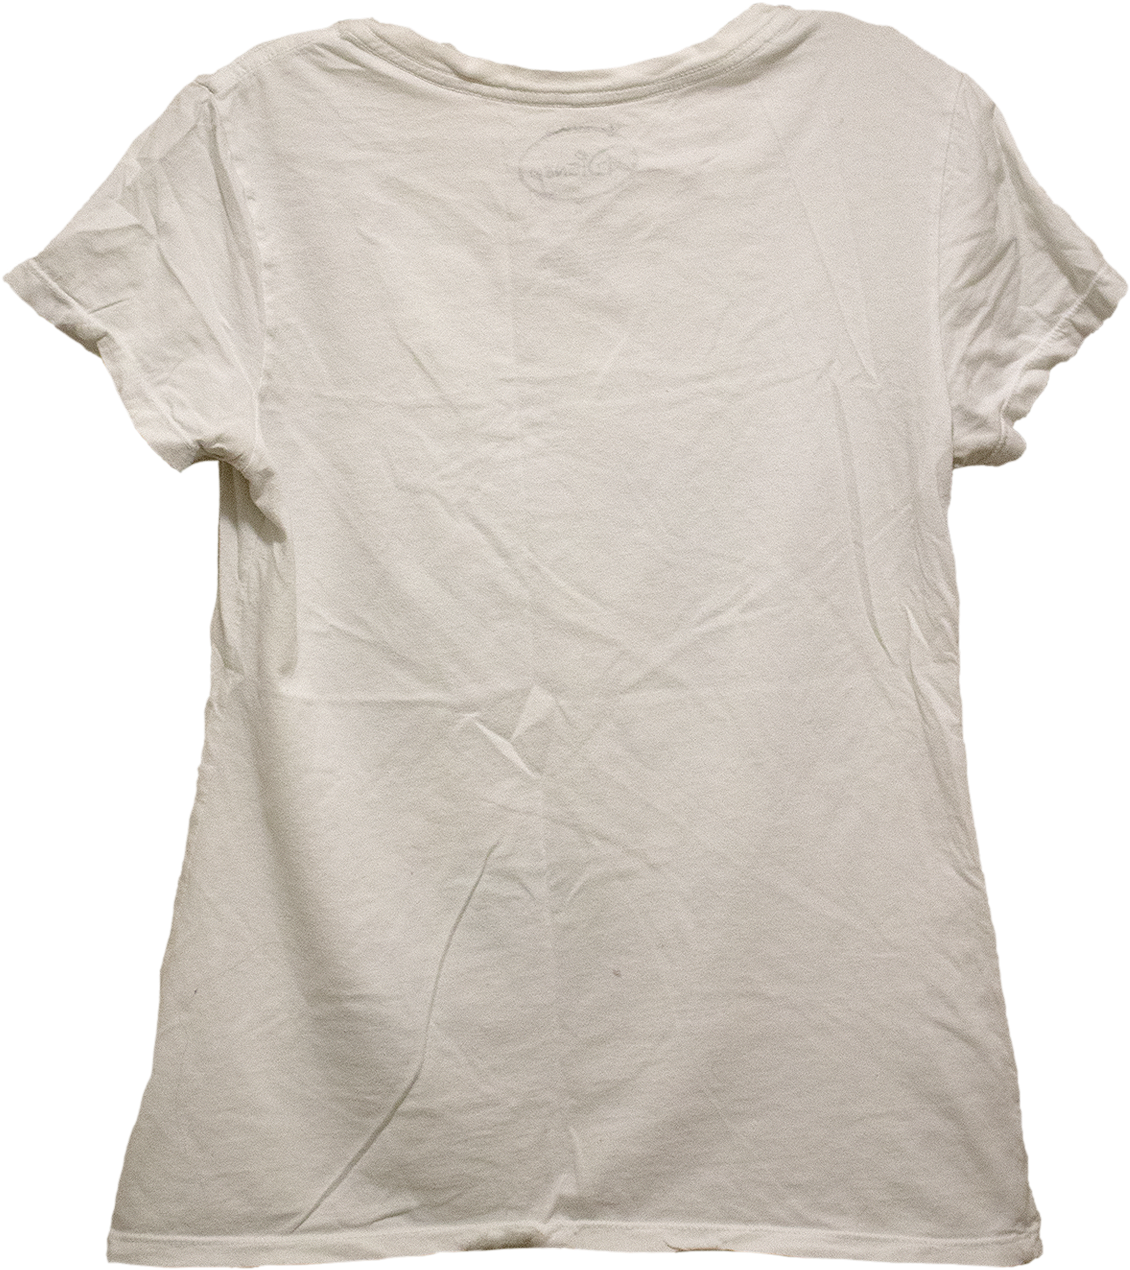 Download The Back Of A V Neck T Shirt That Is Purly White With - Shirt ...